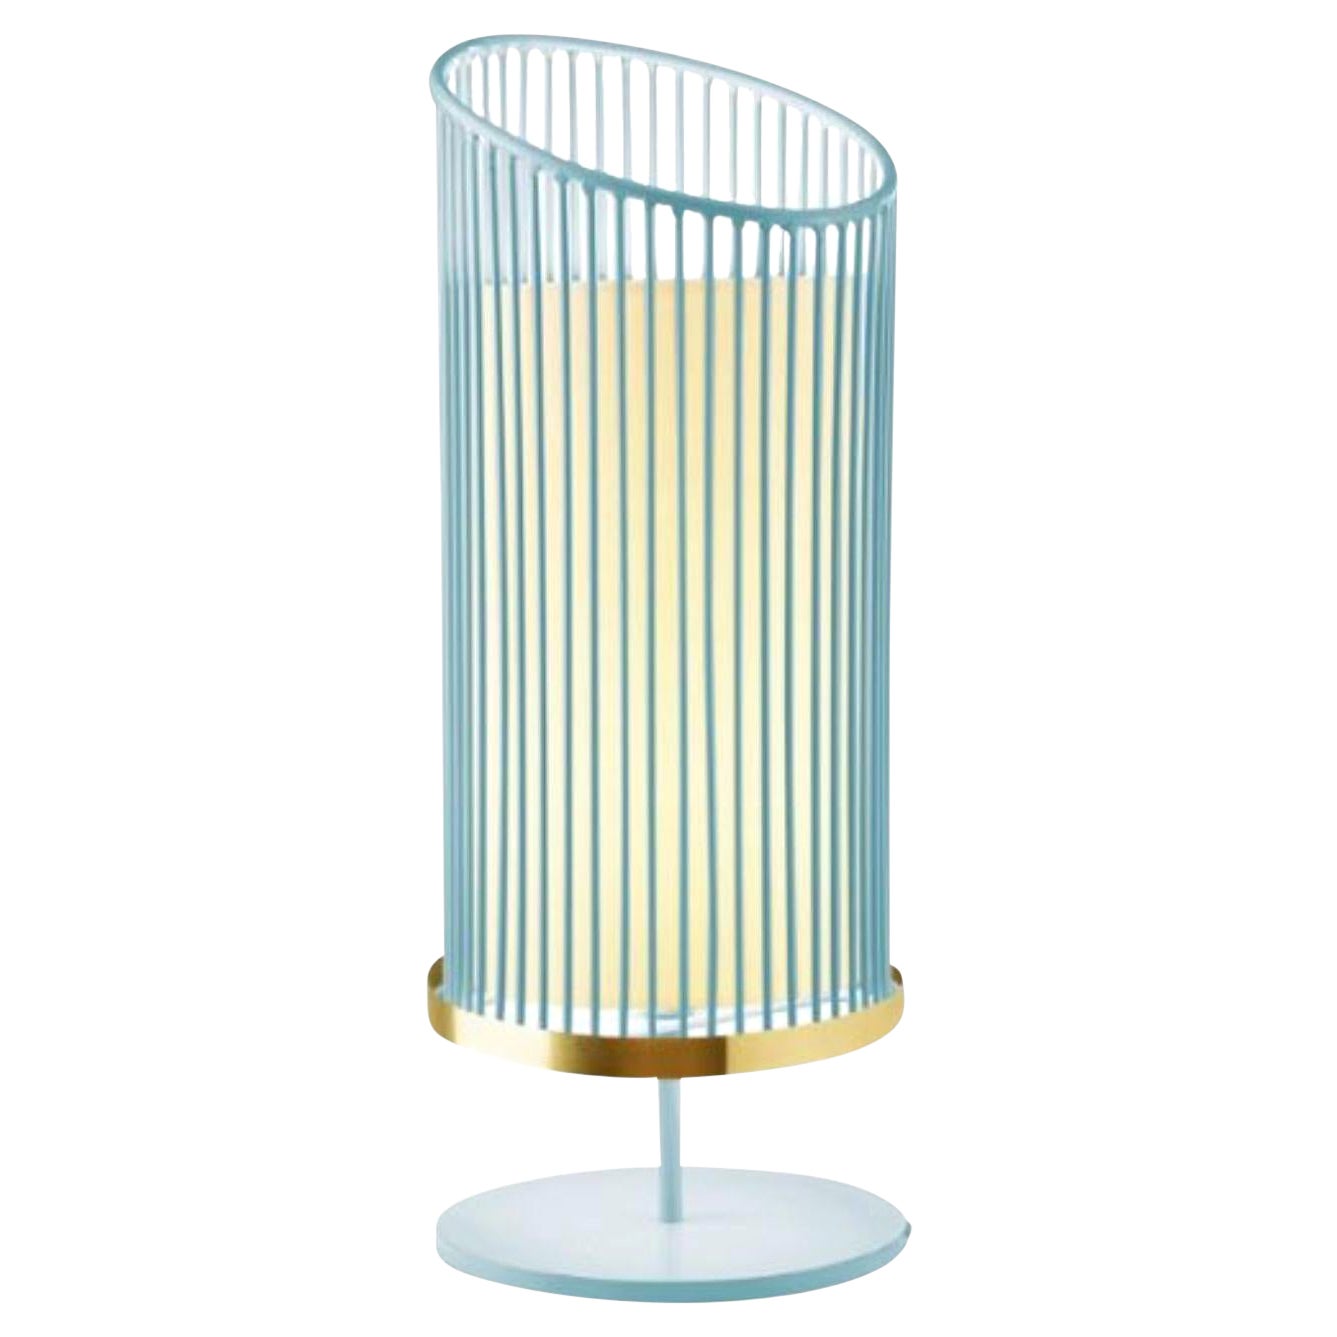 Mint New Spider Table Lamp with Brass Ring by Dooq